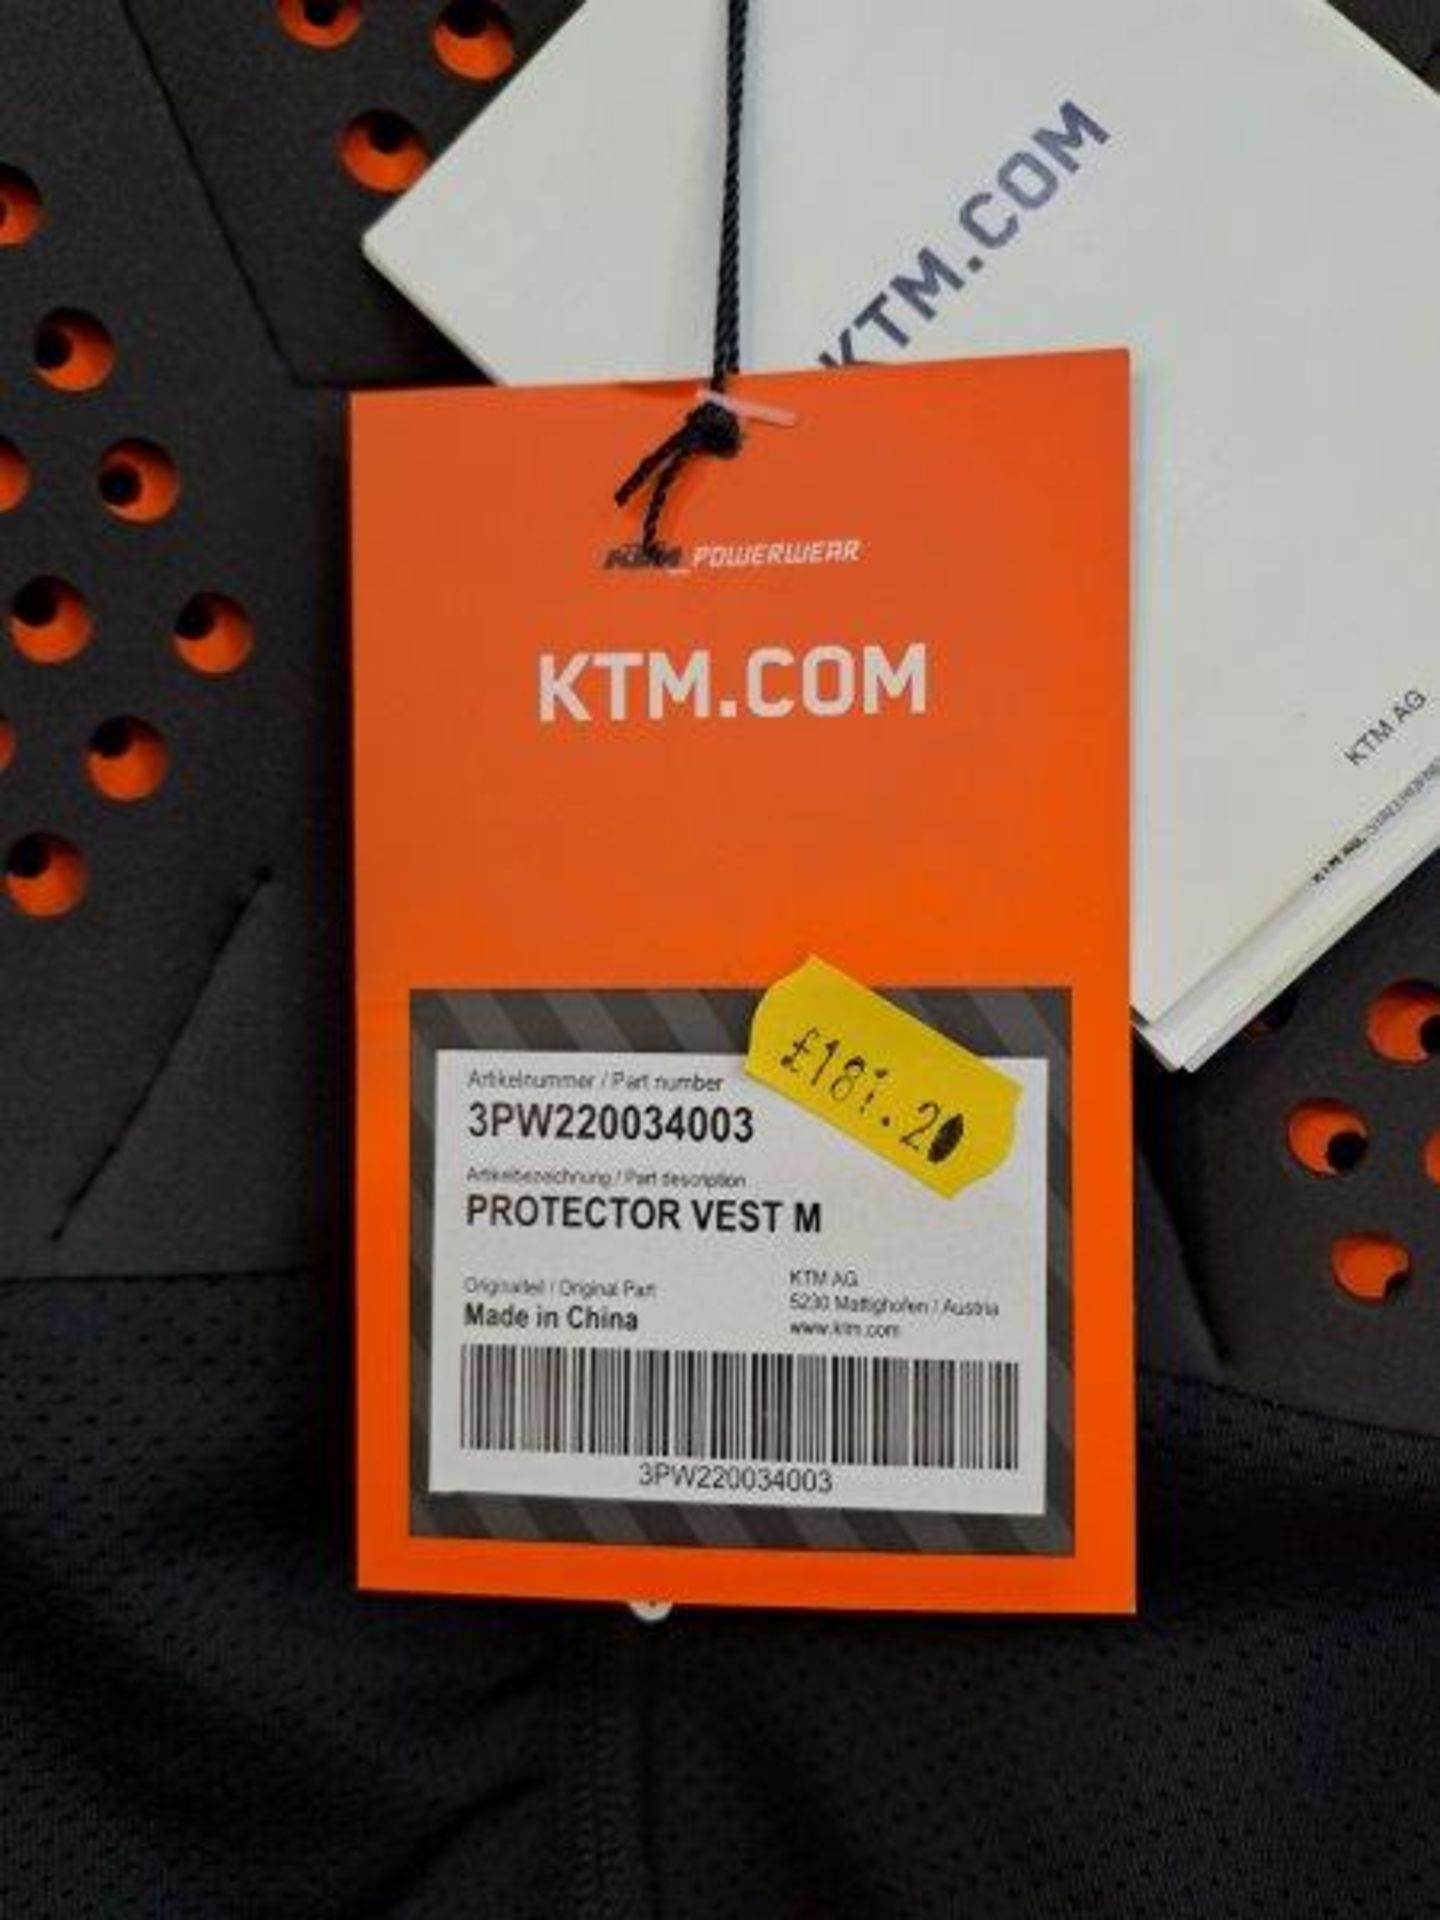 KTM Protector Vest M Body Protector - Image 2 of 5